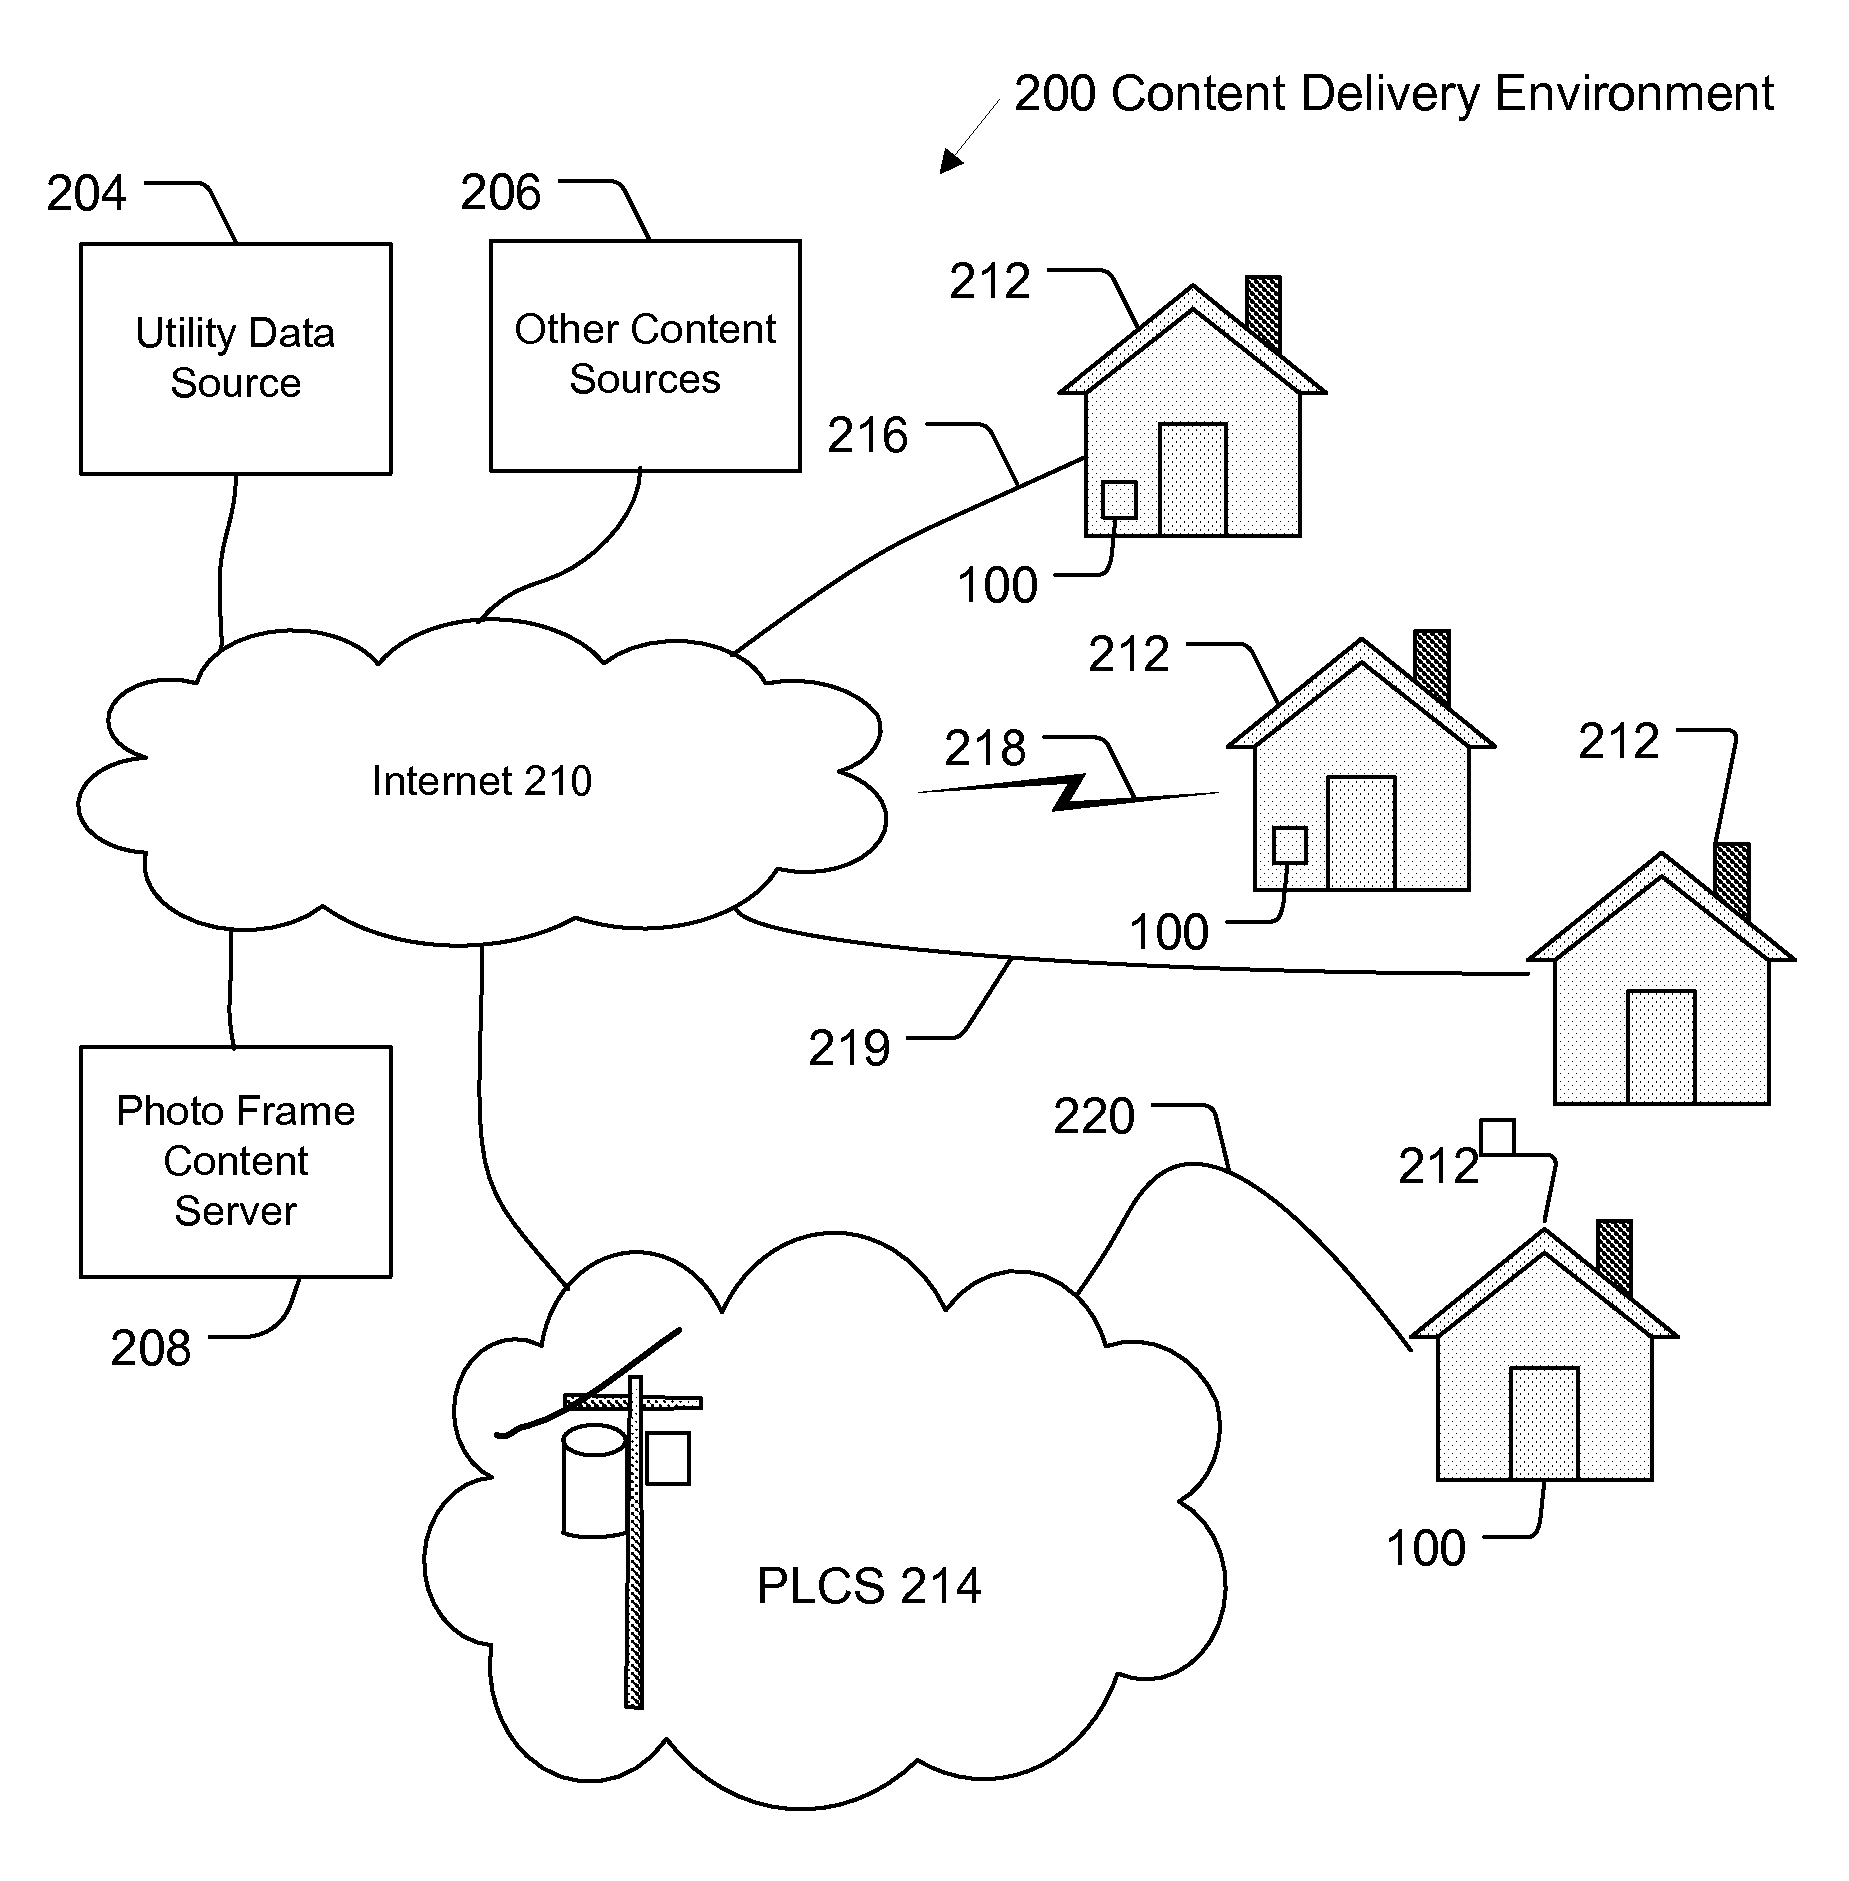 System and Method for Delivering Utility Usage Information and Other Content to a Digital Photo Frame